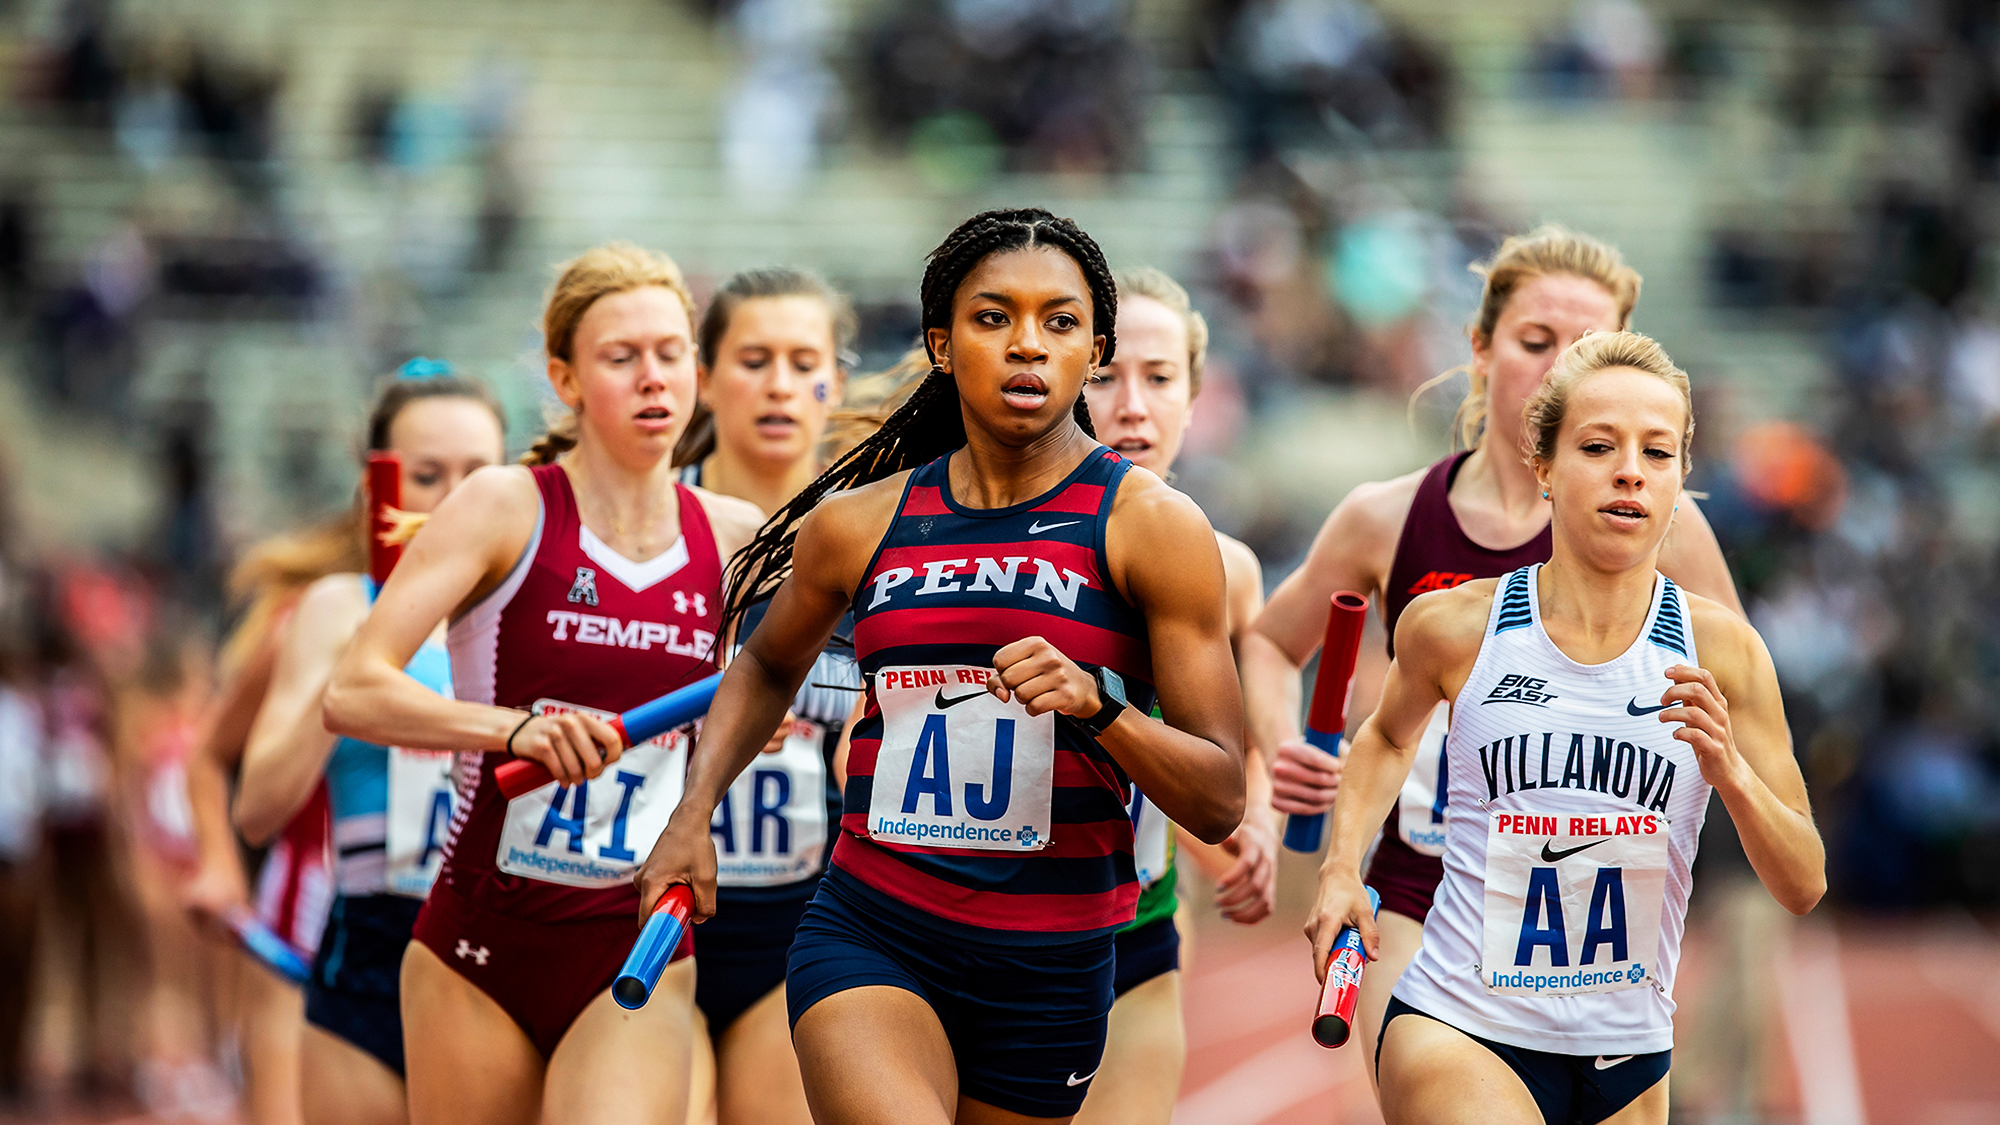 Nia Akins runs with the baton in her hand at the 2019 Penn Relays.